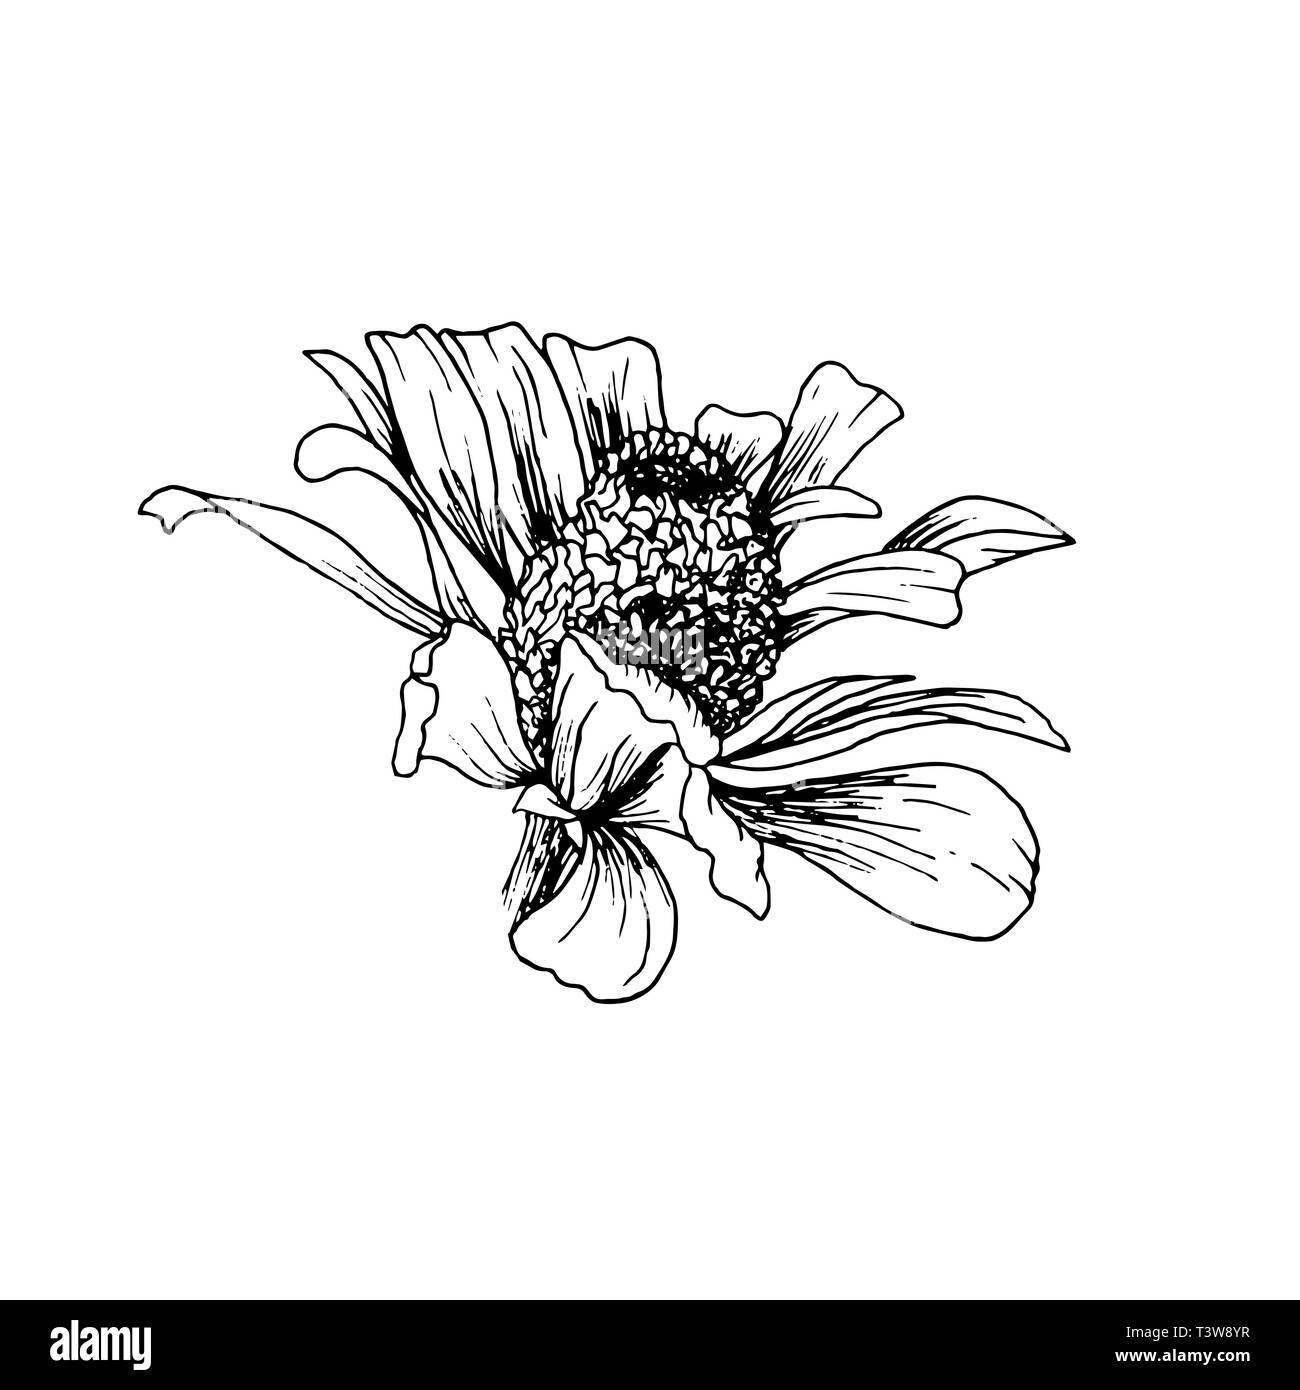 Hand-drawn Flower Sketch. Isolated Helenium Autumnale Vector Design Graphic Element in Outline for Engraving or Etching Stock Vector